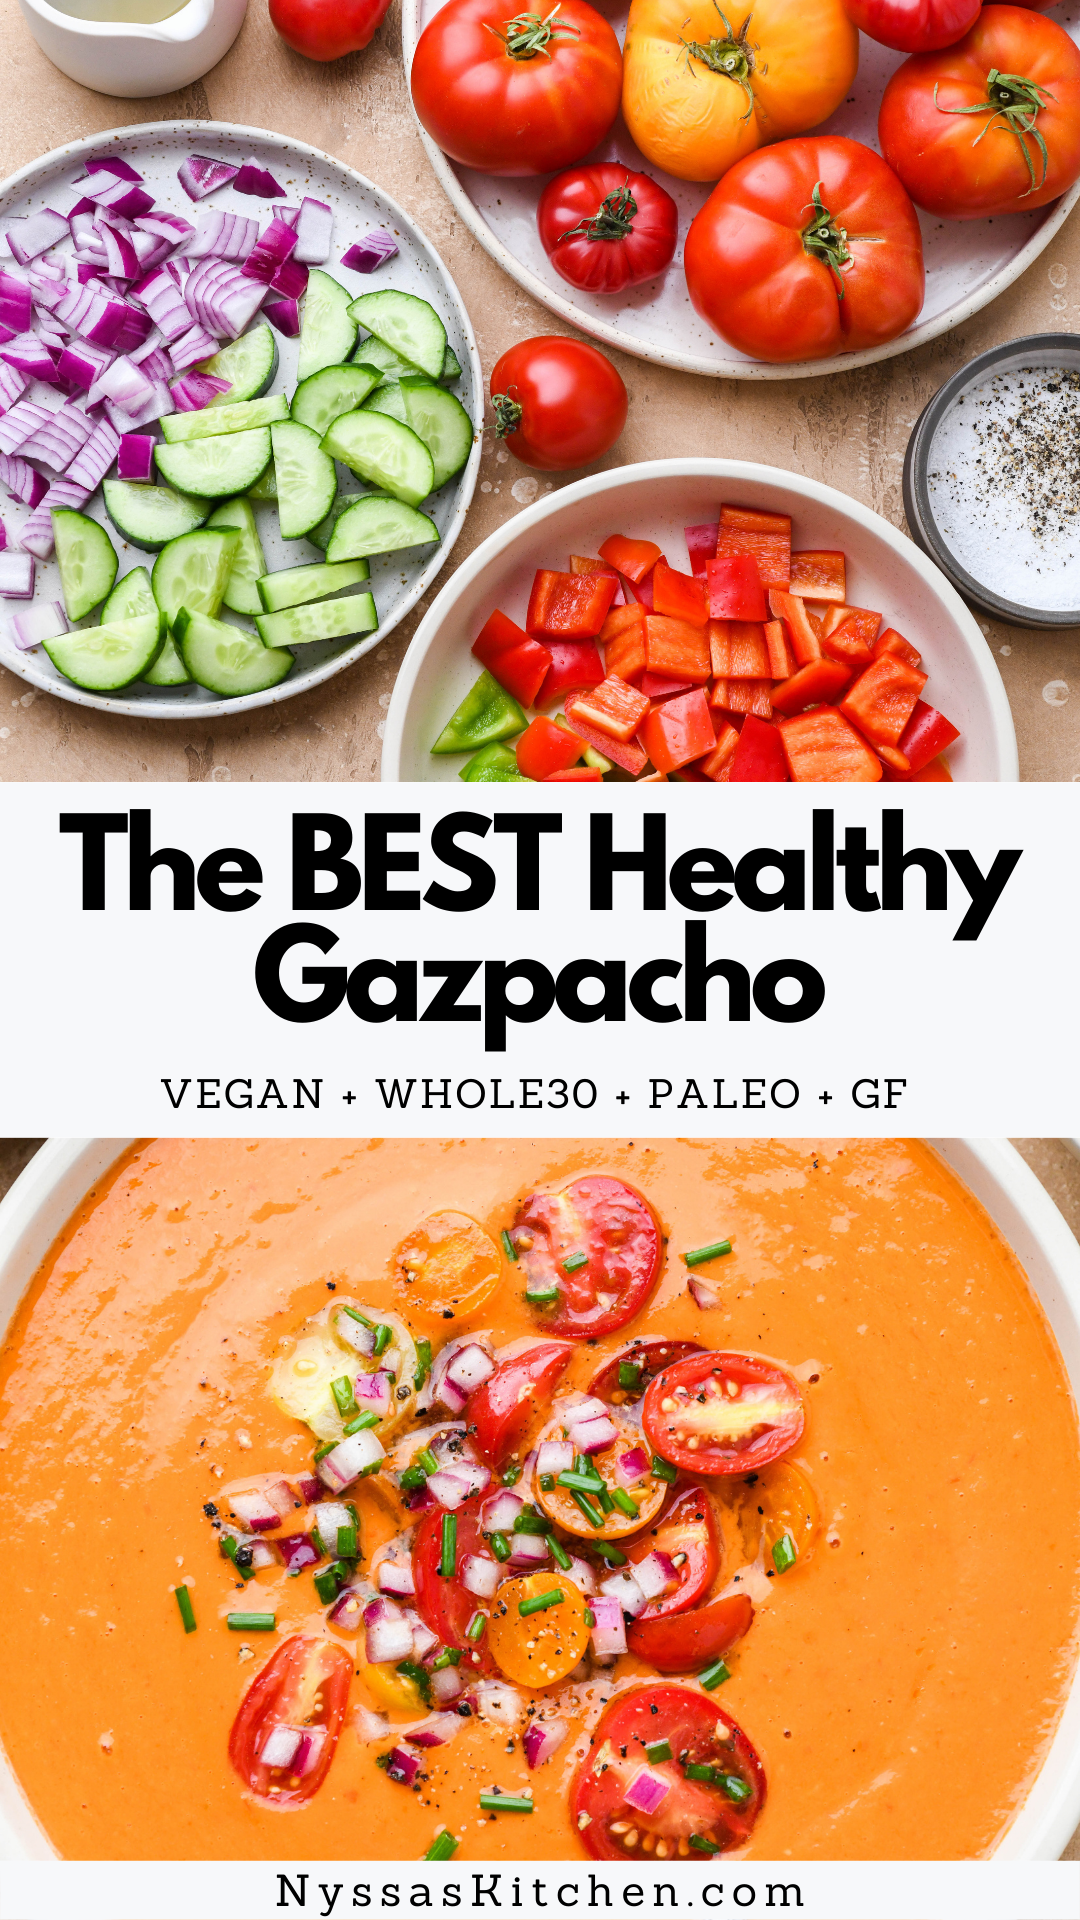 The BEST healthy gazpacho is packed with all the goodness of fresh summer produce like tomatoes, peppers, and cucumber. It's healthy, simple to make (blender recipe!), and a real show-stopper. Made without bread for a delicious whole30, gluten free, paleo, and vegan version of a classic!